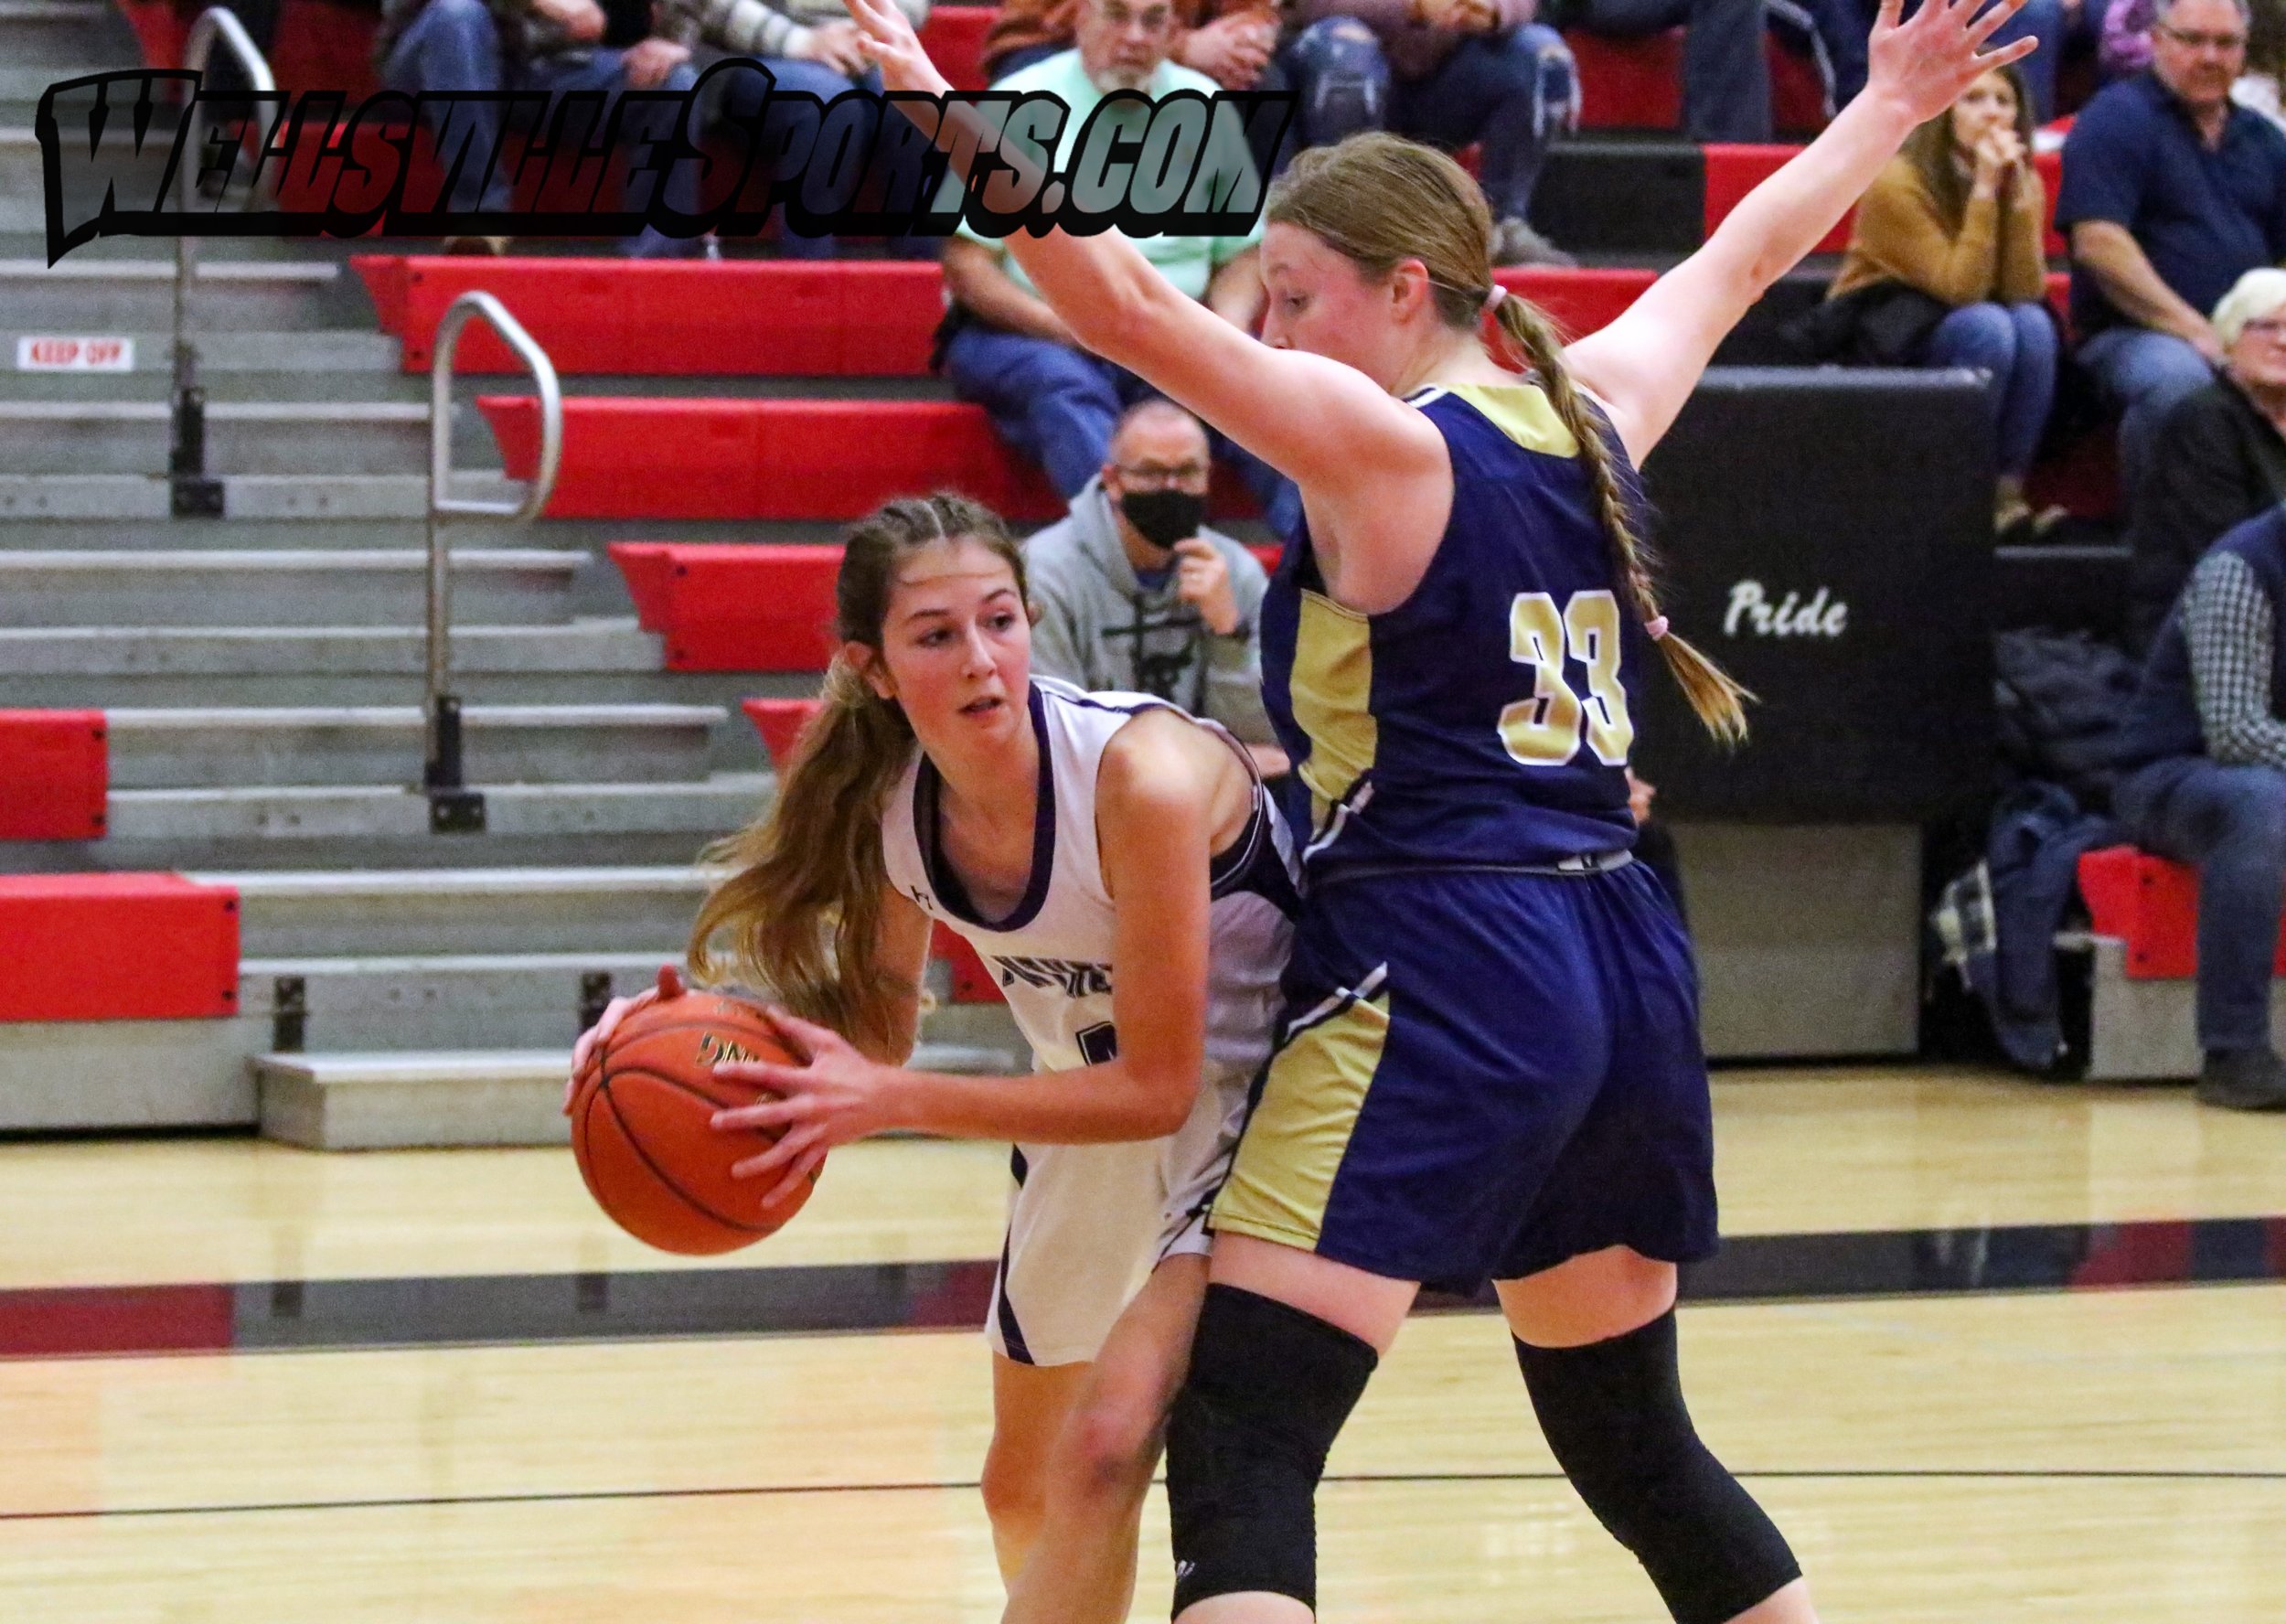  Andover/Whitesville freshman Graci Lewis-Ellison, off-center, looks to provide a pass inside while be guarded by the Notre Dame-Batavia defense down low during Monday’s Class D State Qualifier in Dansville. [Chris Brooks/WellsvilleSports.com] 